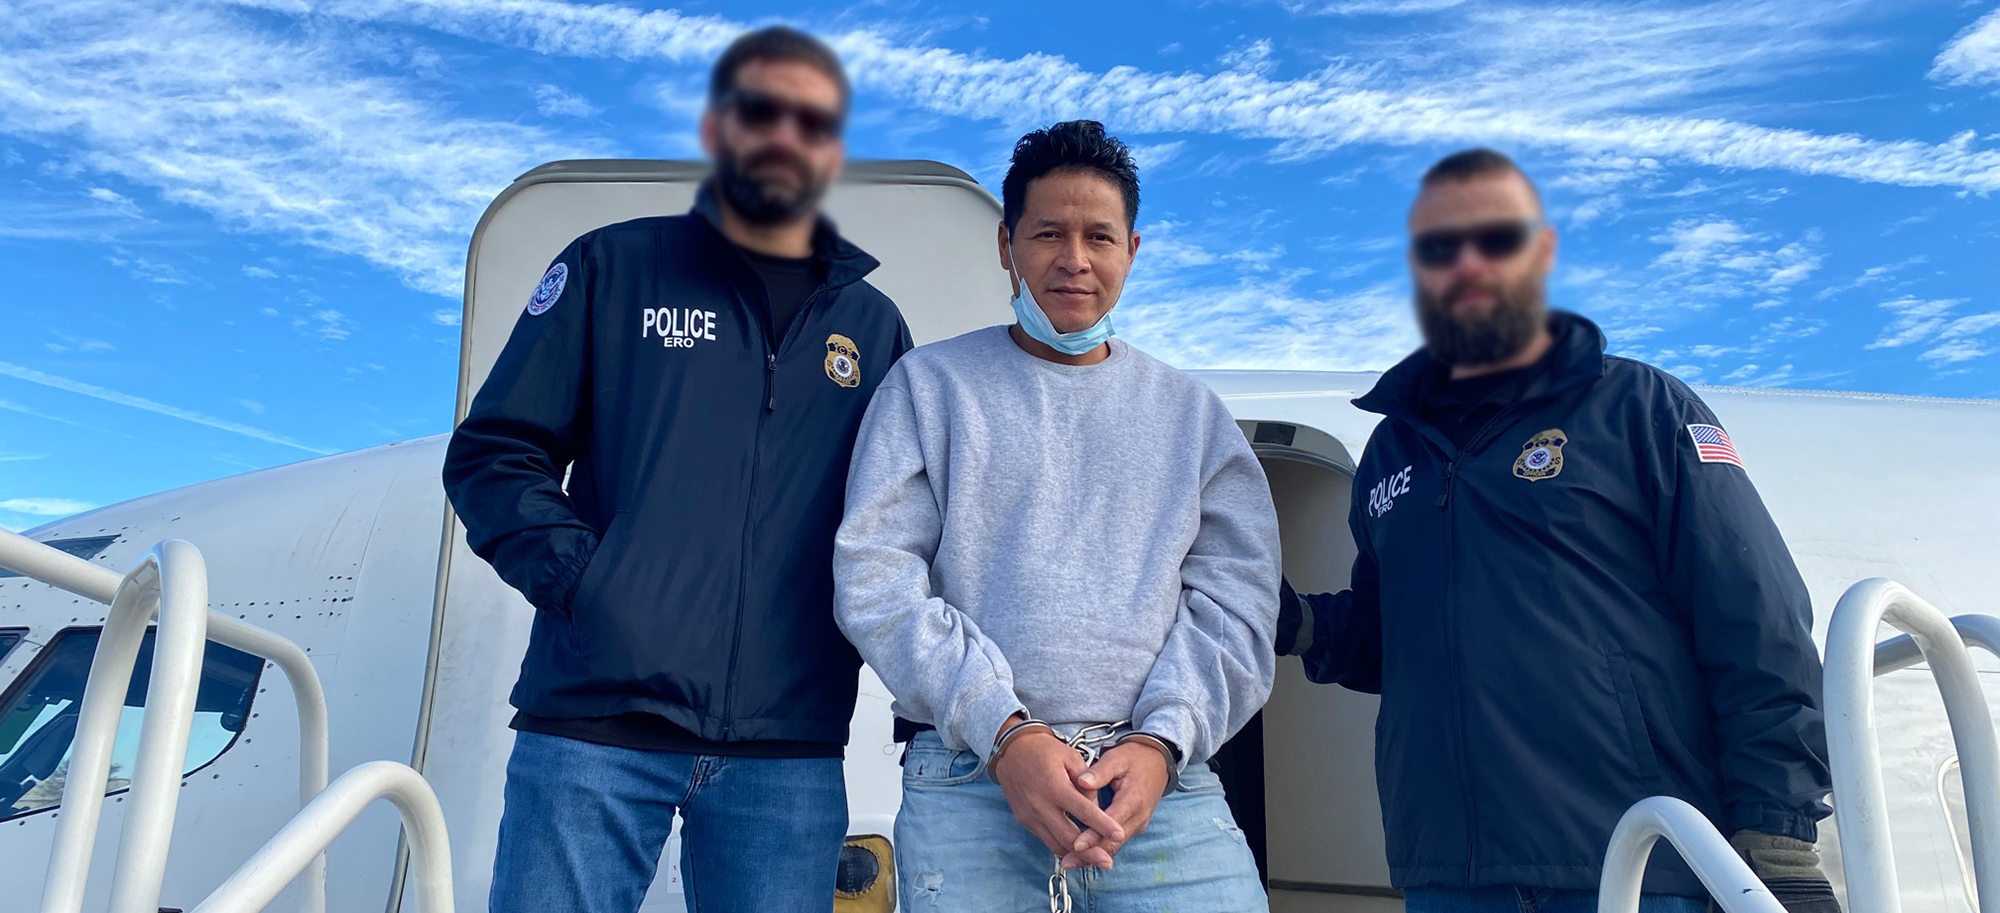 Wilmer Manuel Castro Murillo, 44, was transported from the South Texas ICE Processing Center in Pearsall to San Pedro Sula, Honduras. 